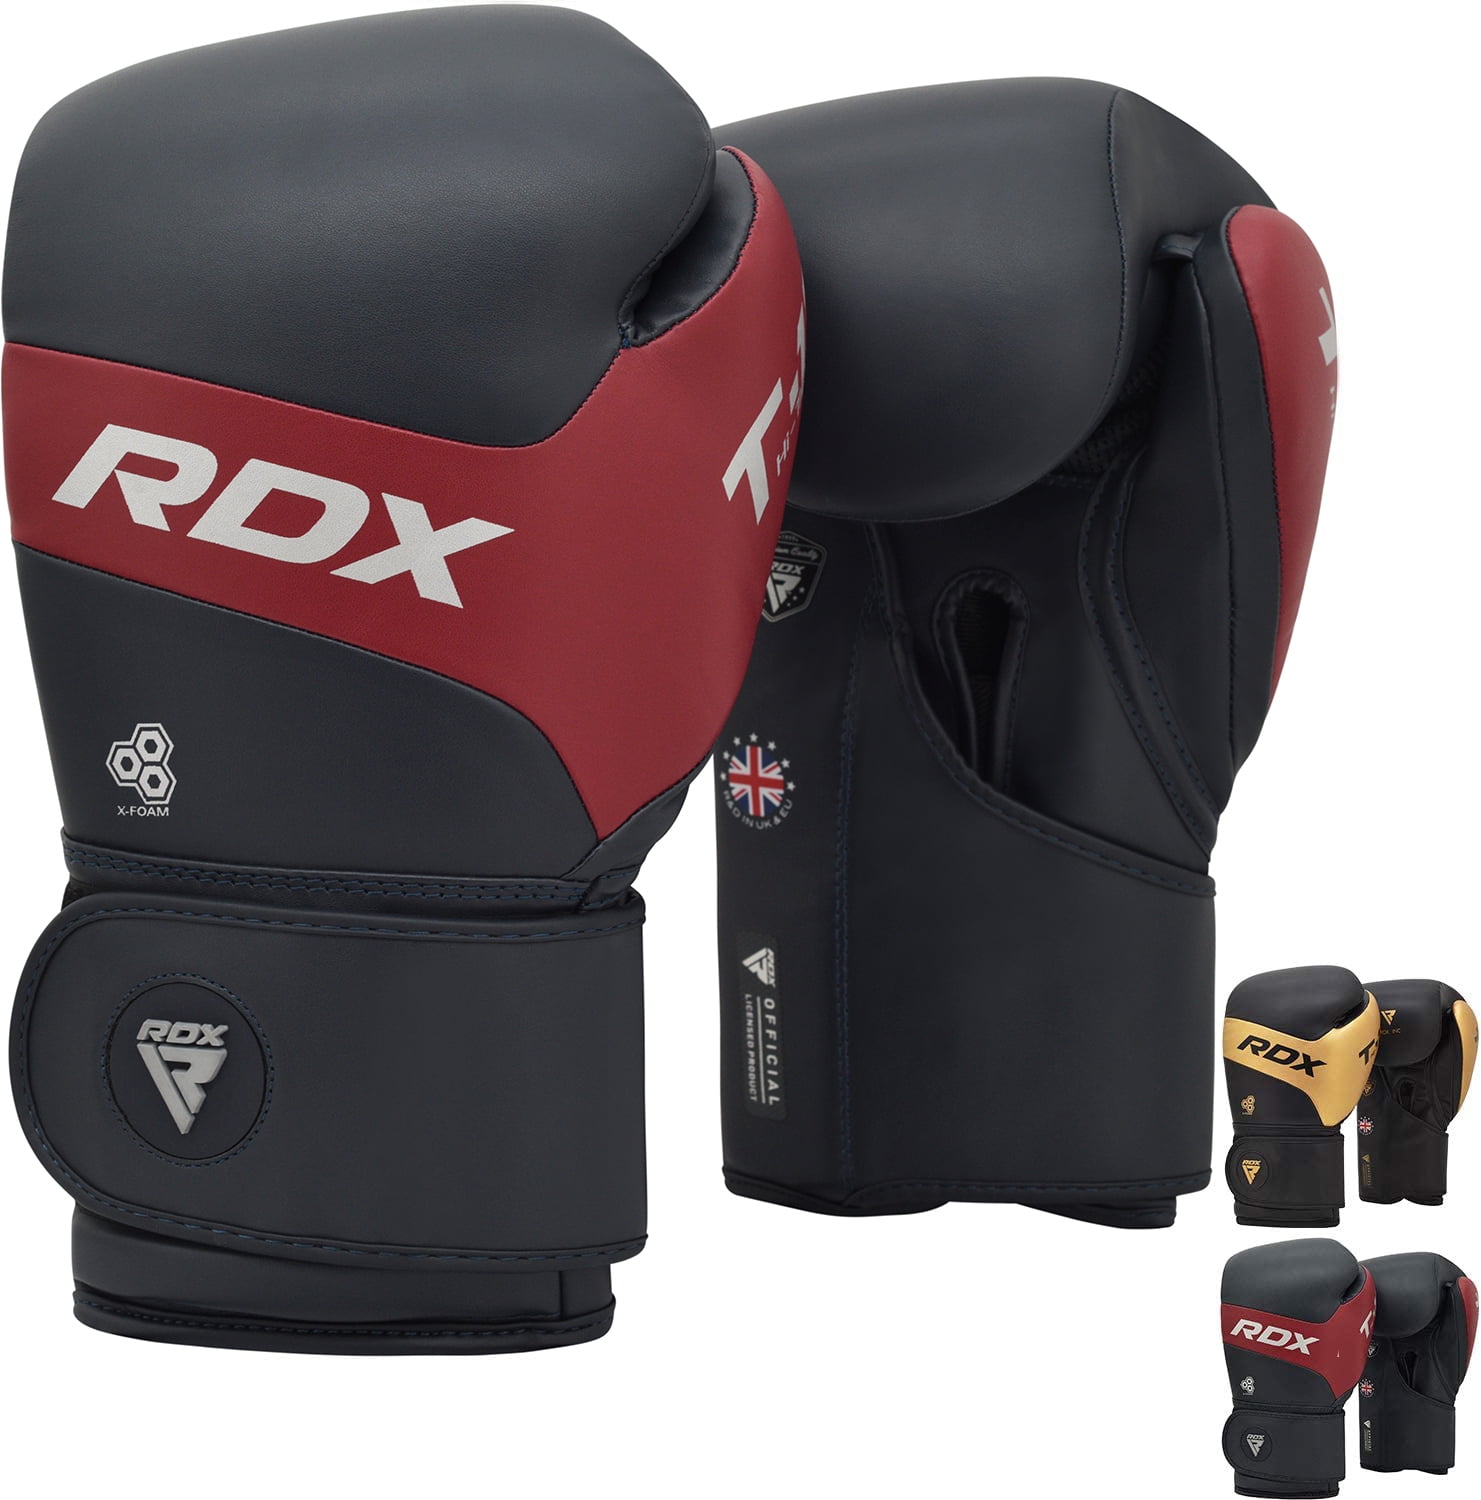 Great for Punch Bag Focus Pads Fighting and Kickboxing Maya Hide Leather Mitts for Sparring RDX Boxing Gloves for Training and Muay Thai Grappling Dummy and Double End Speed Ball Punching 